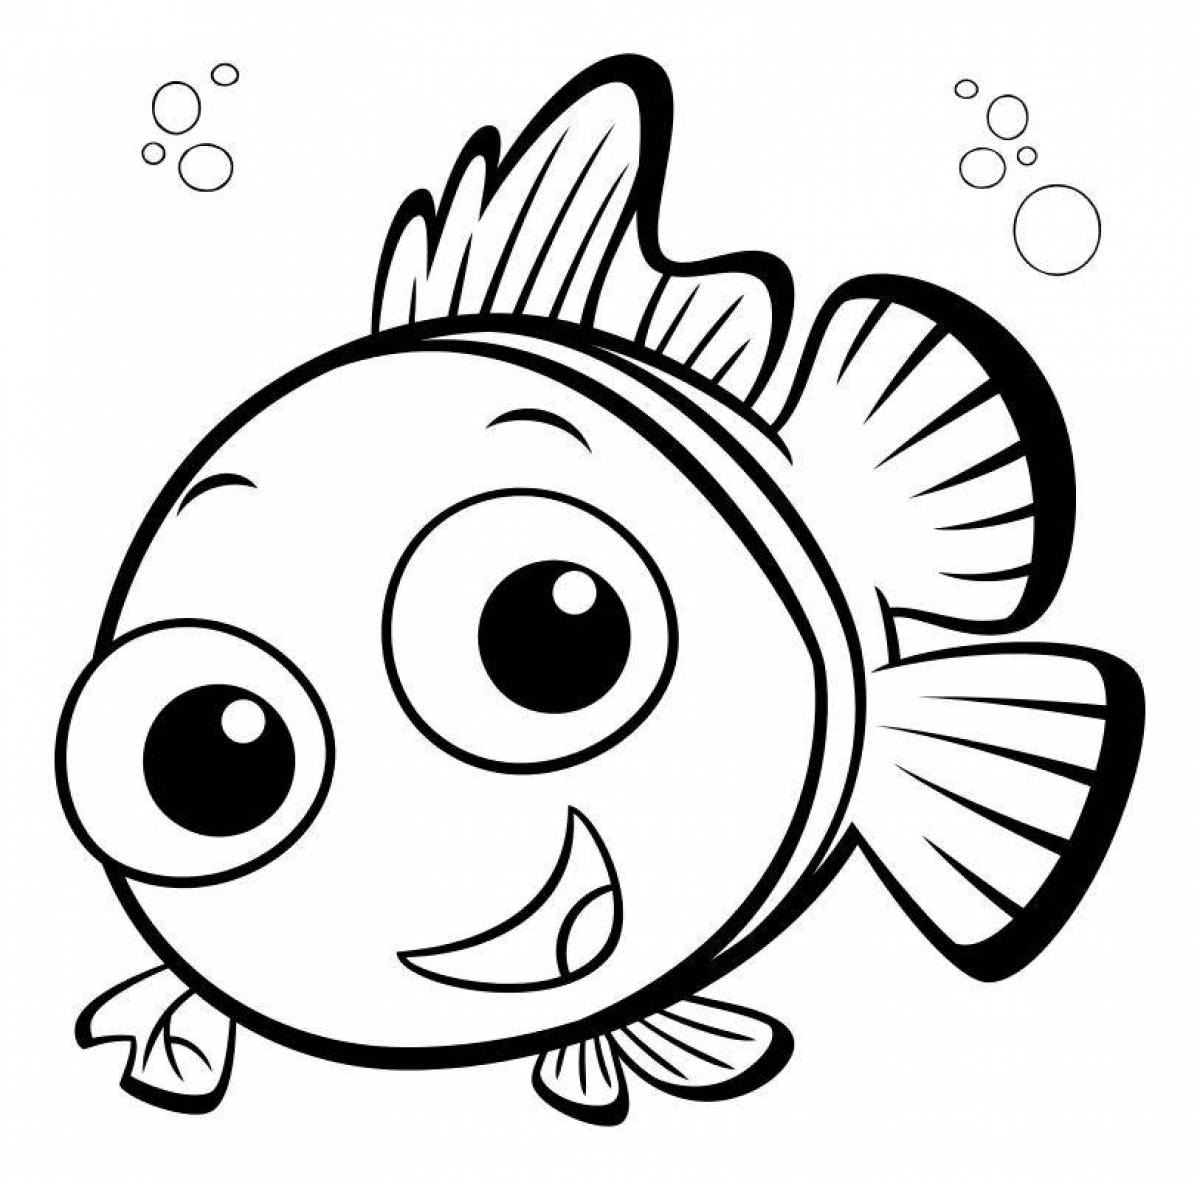 Trendy fish coloring page for kids